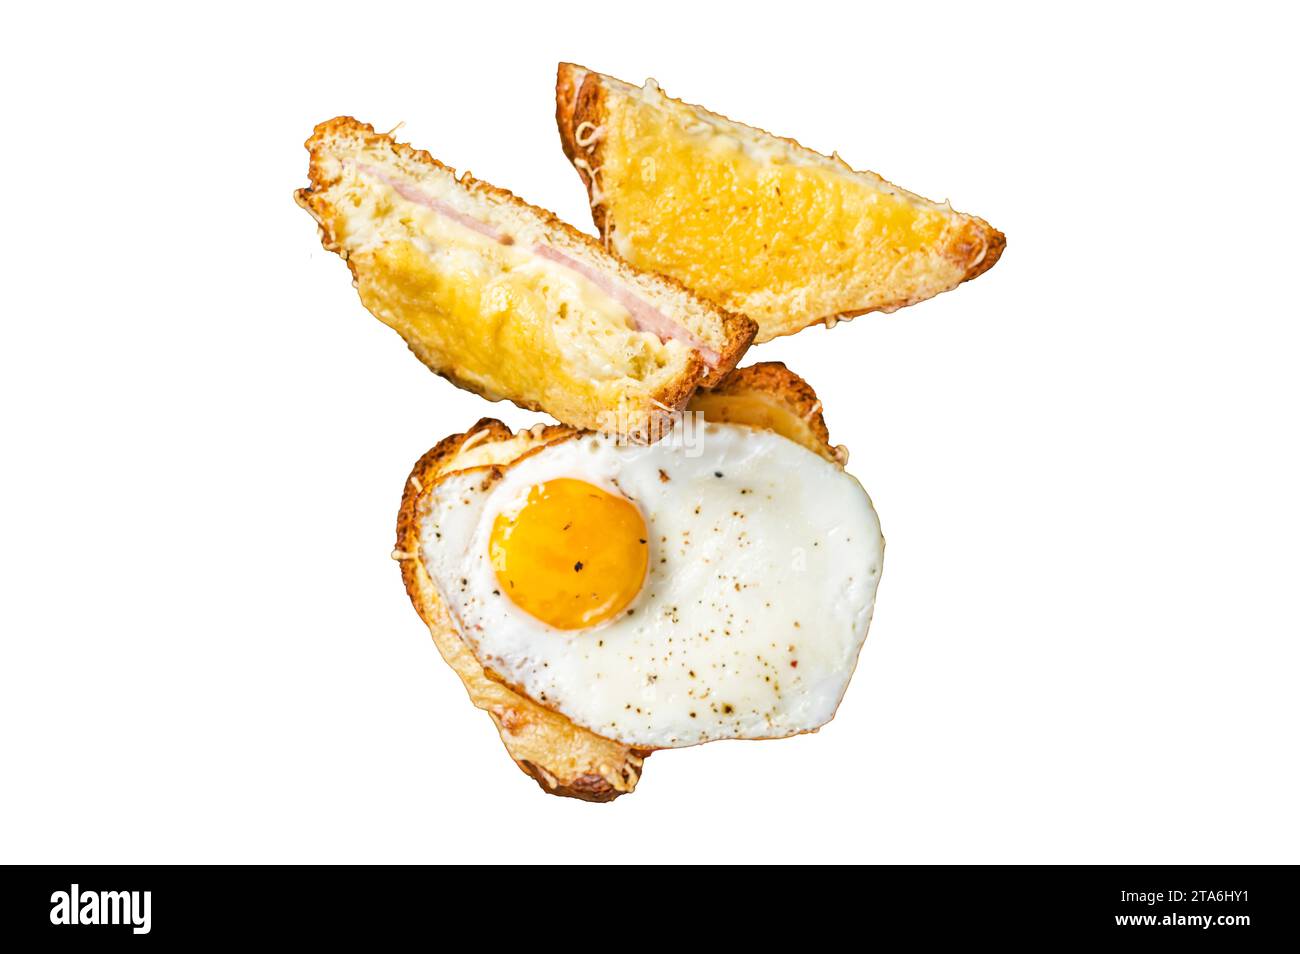 Croque monsieur and croque madame sandwiches with sliced ham, melted emmental cheese and egg, French toasts. Isolated, white background Stock Photo